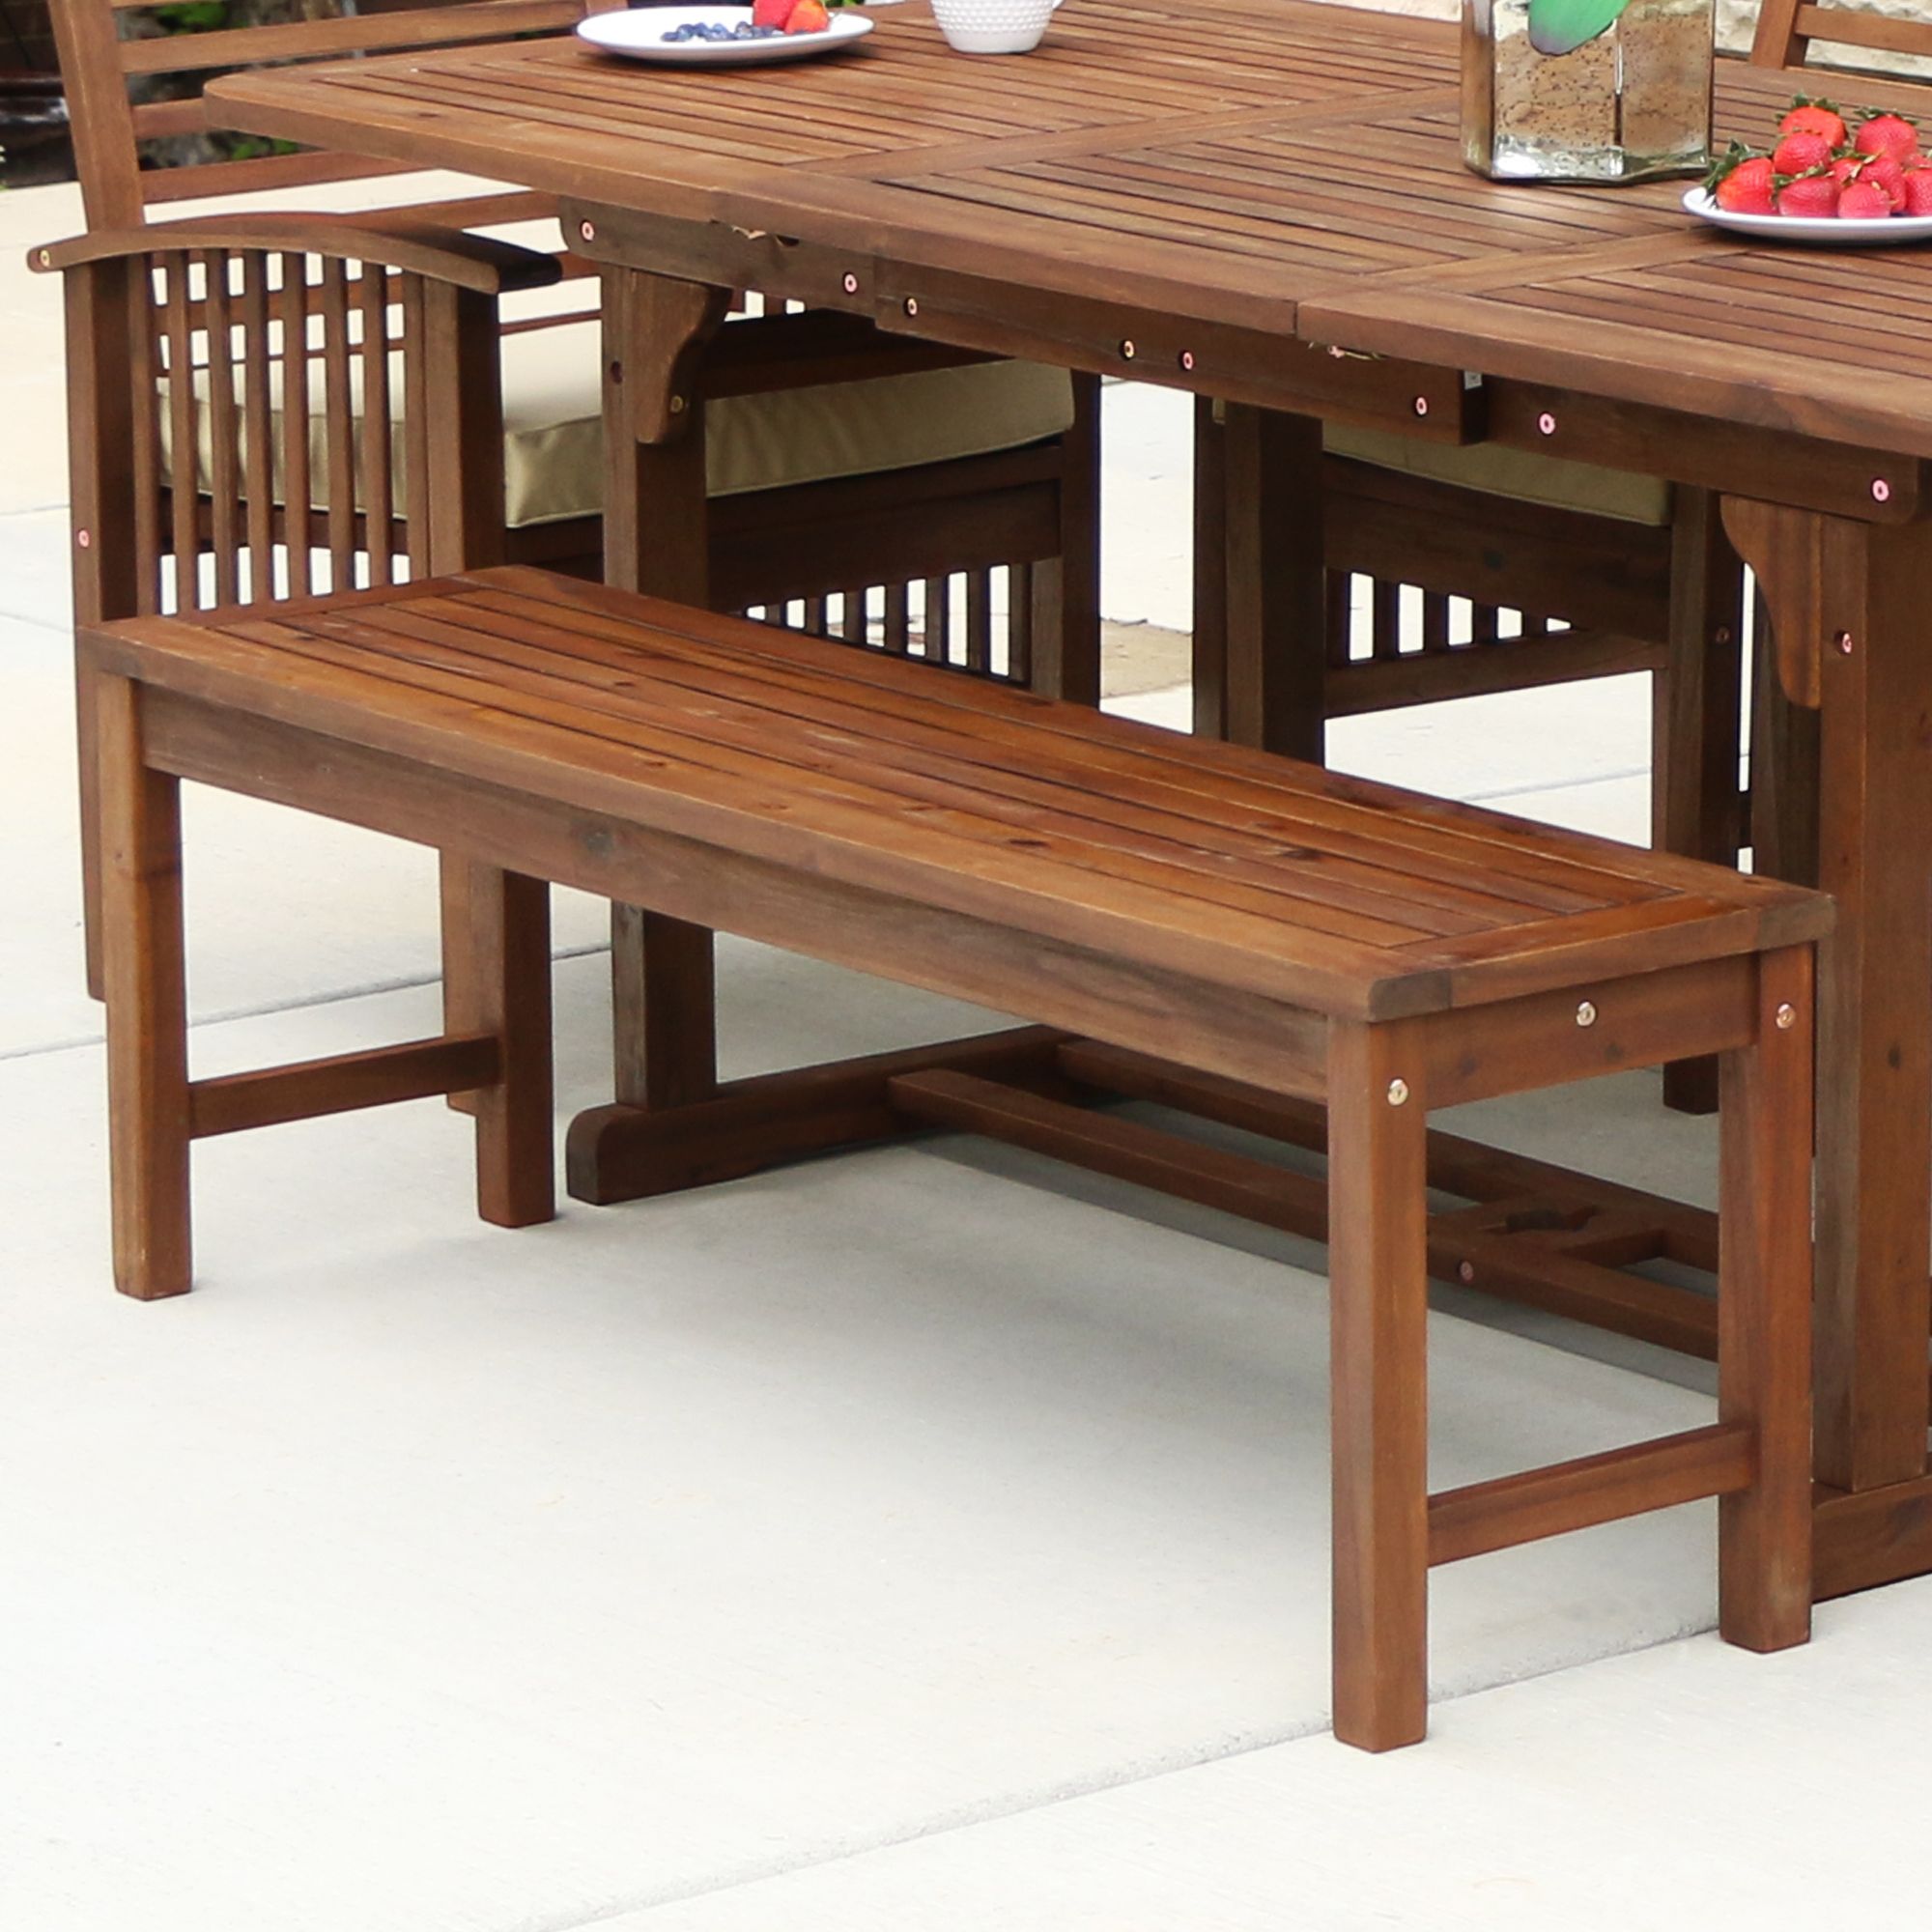 W. Trends Outdoor Hunter Acacia Wood Dining Bench - Dark Brown